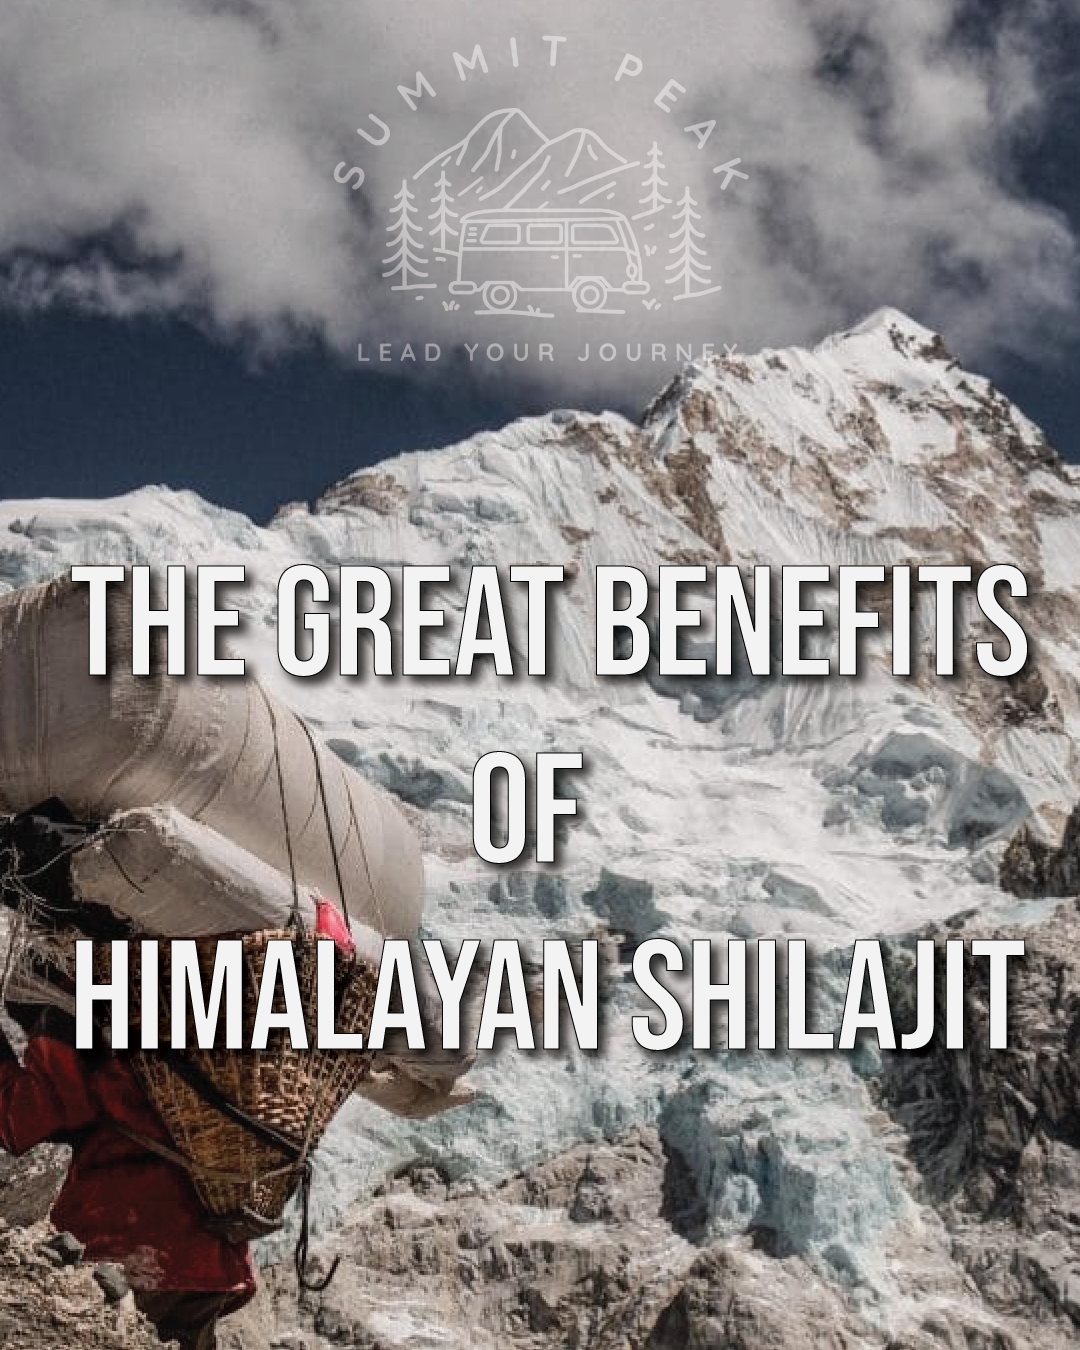 The Magical Powers of Shilajit